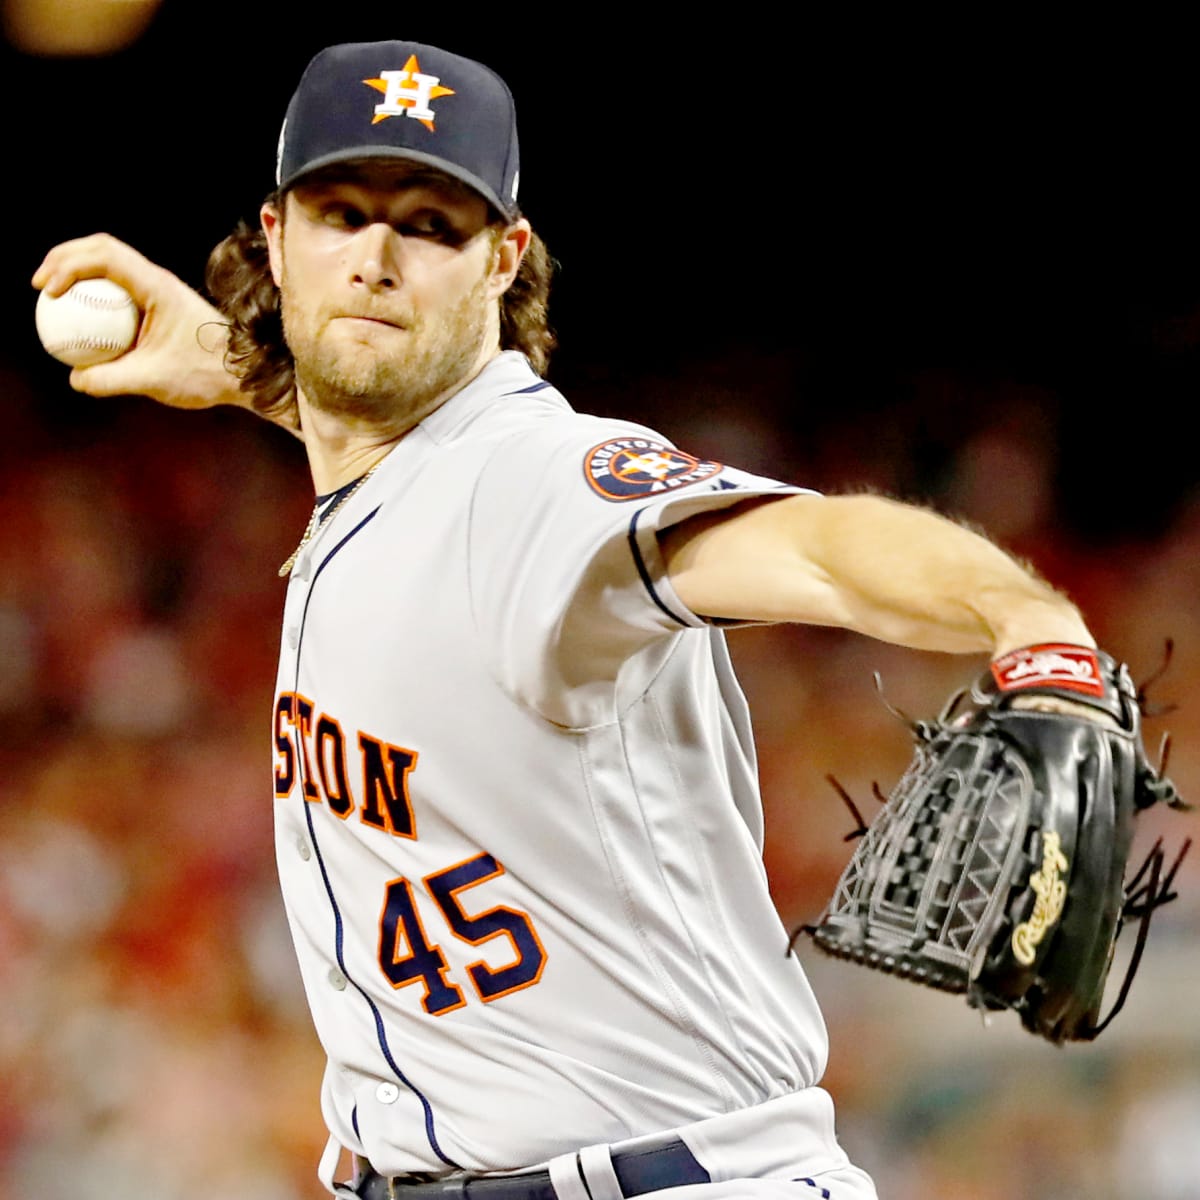 Gerrit Cole strikes out 15 vs. Rays